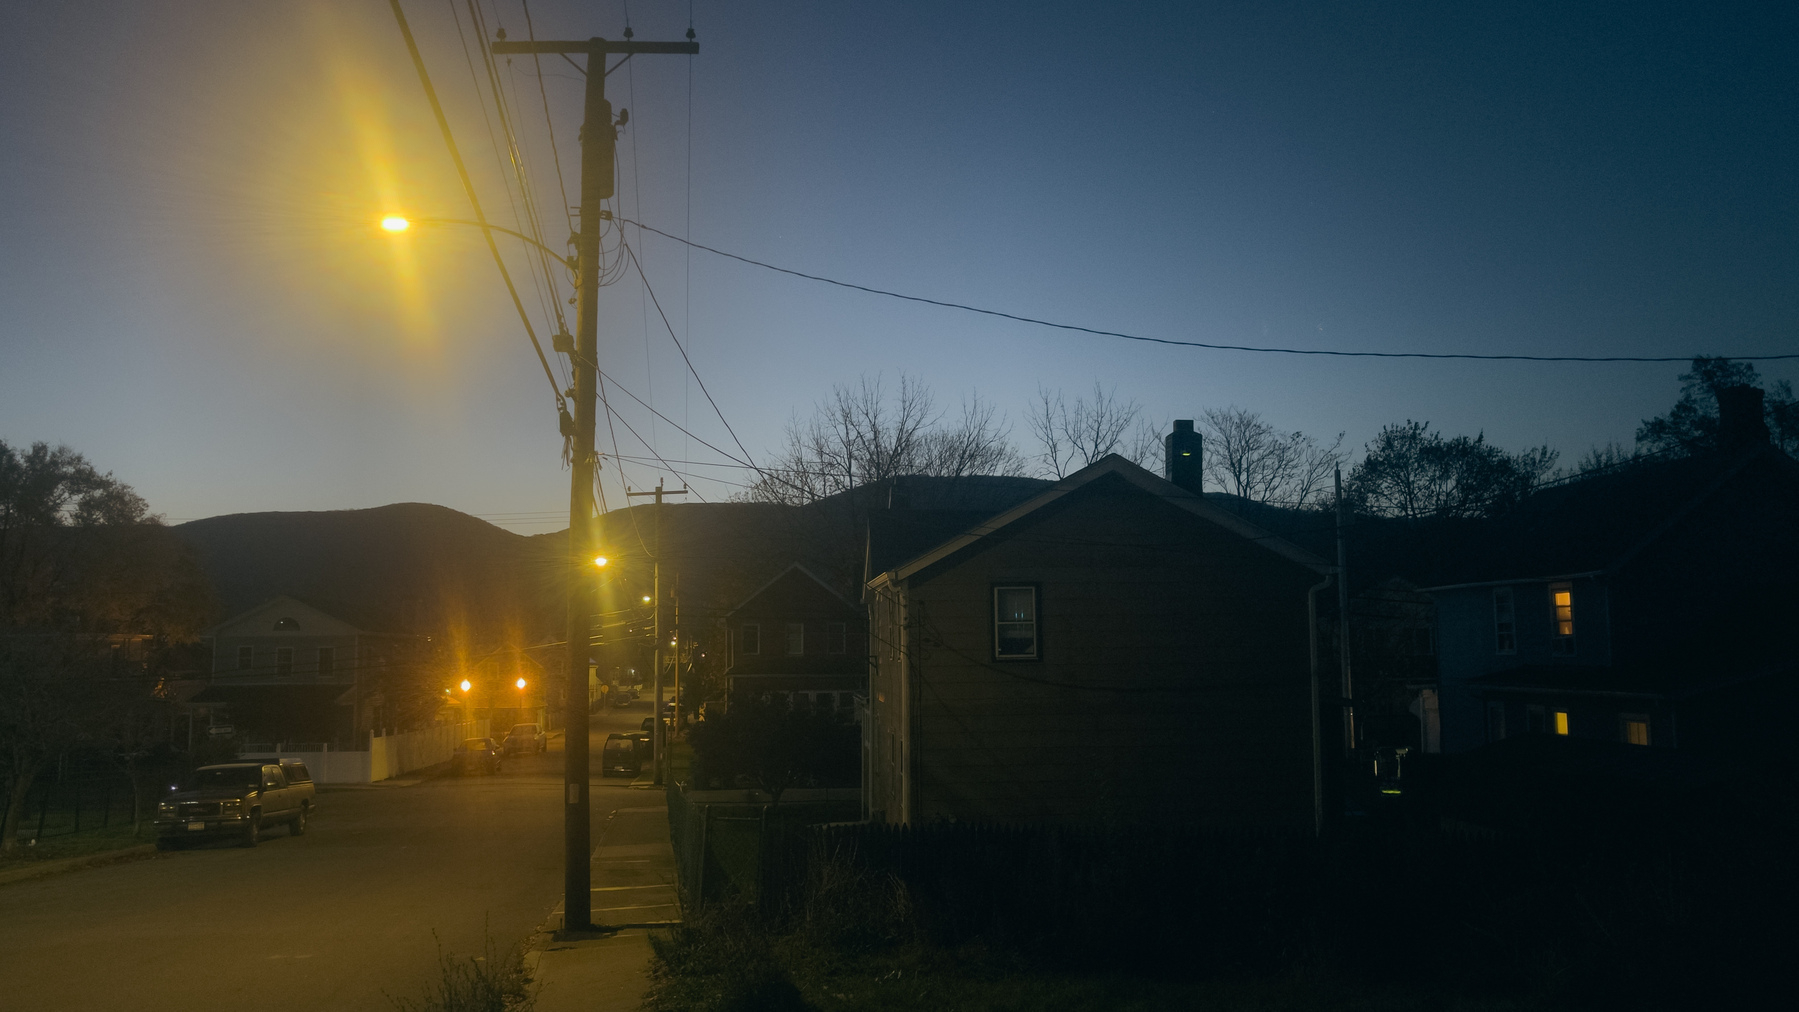 Early morning landscape/streetscape with mountains in the distance, utility poles and streetlights receding into the distance and houses in silhouette to the right.